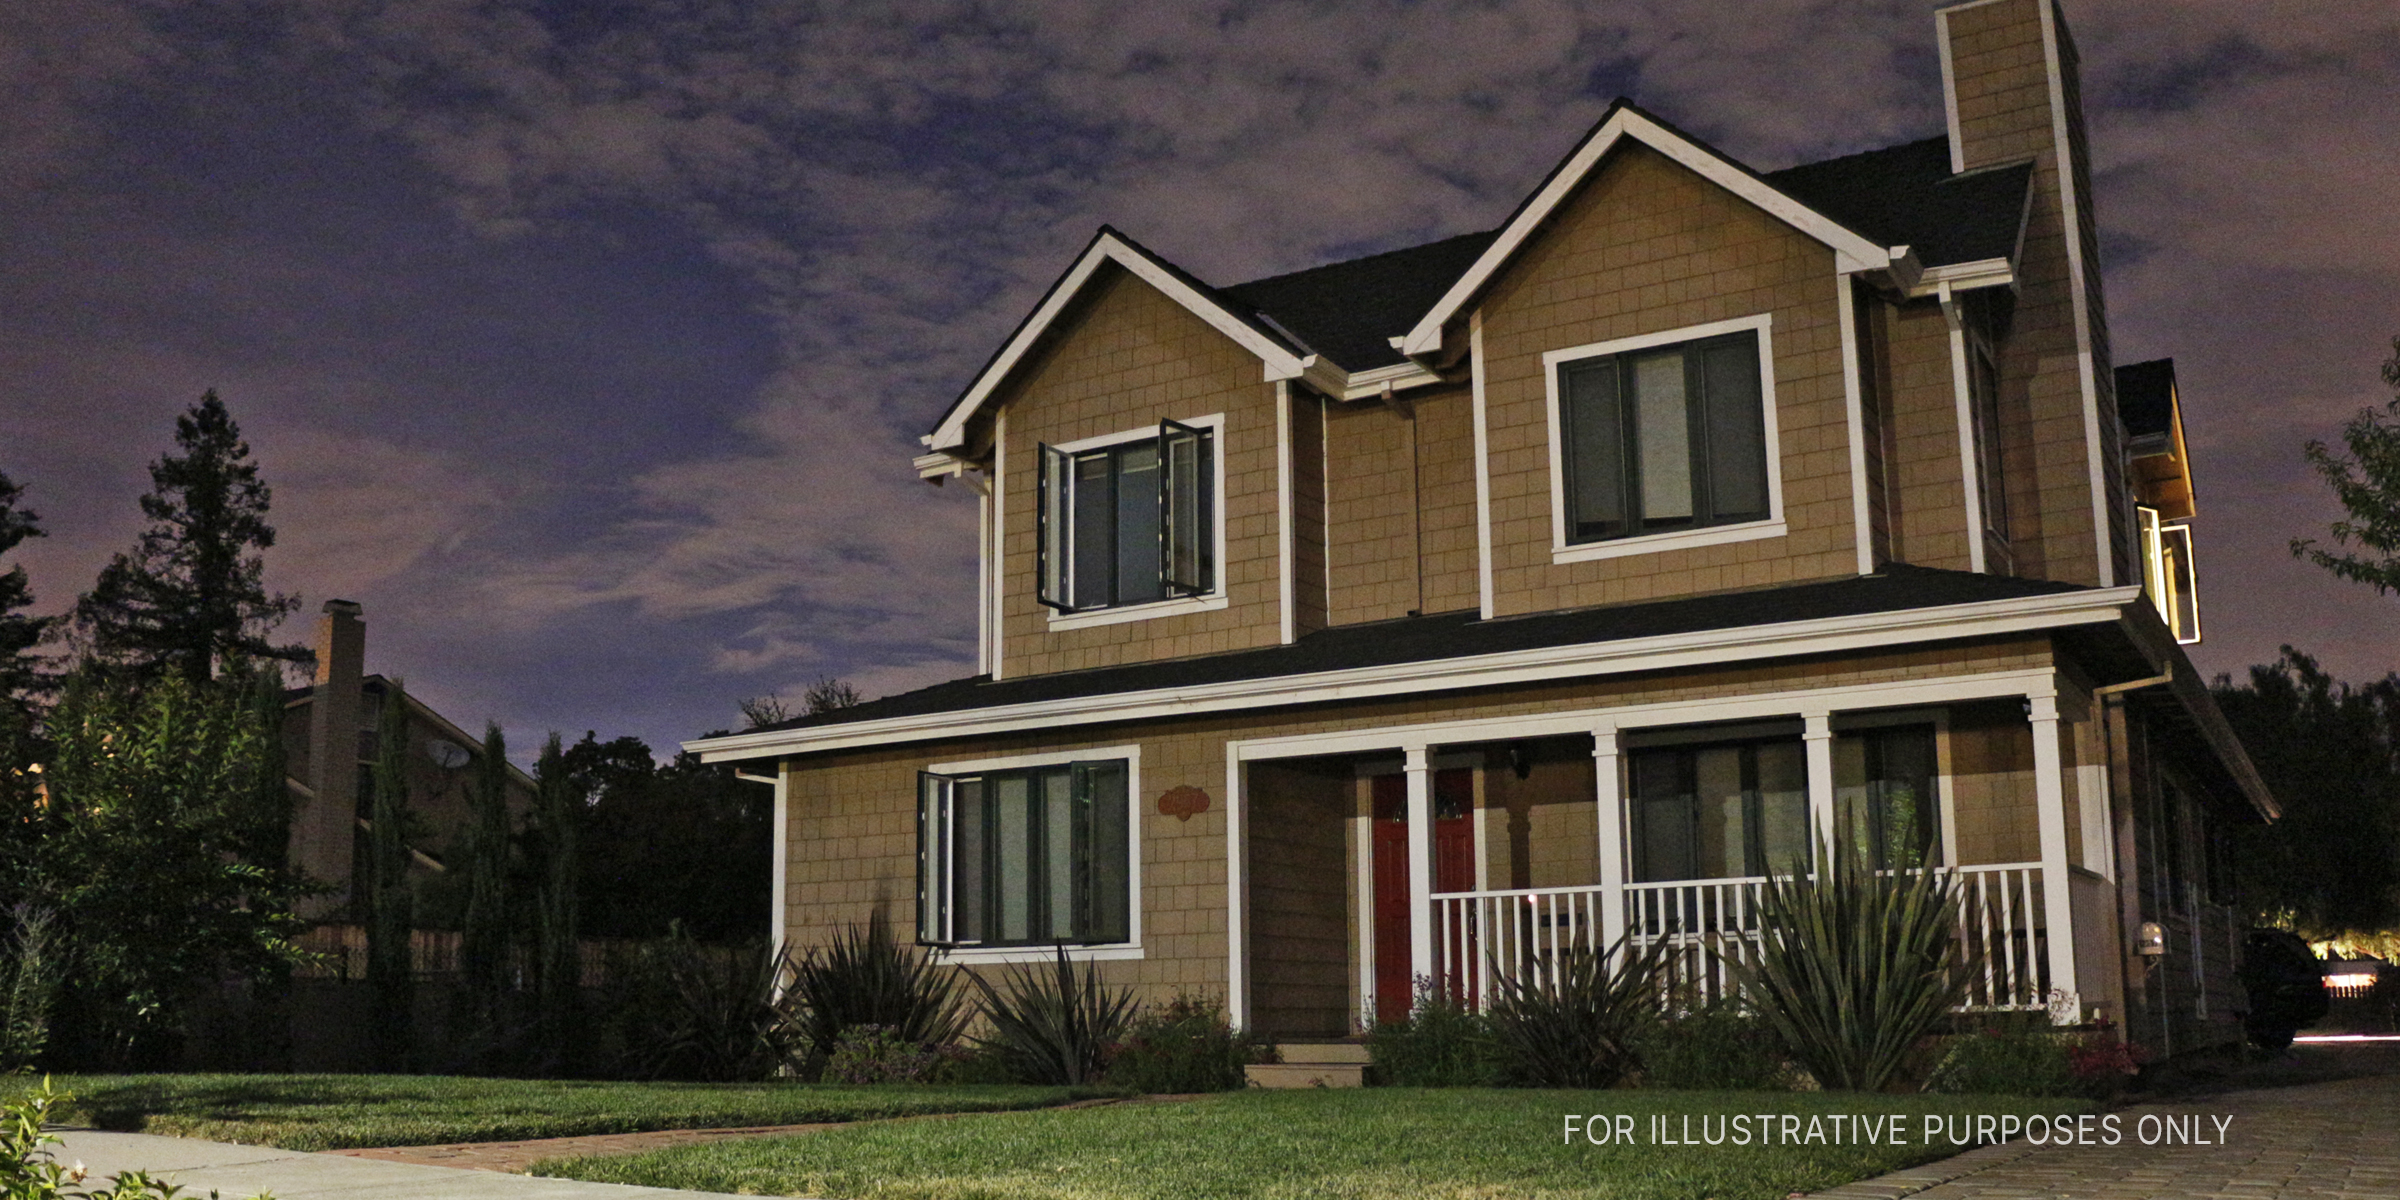 Photo of a house at night | Source: Flickr/energylabsbr (CC BY 2.0)